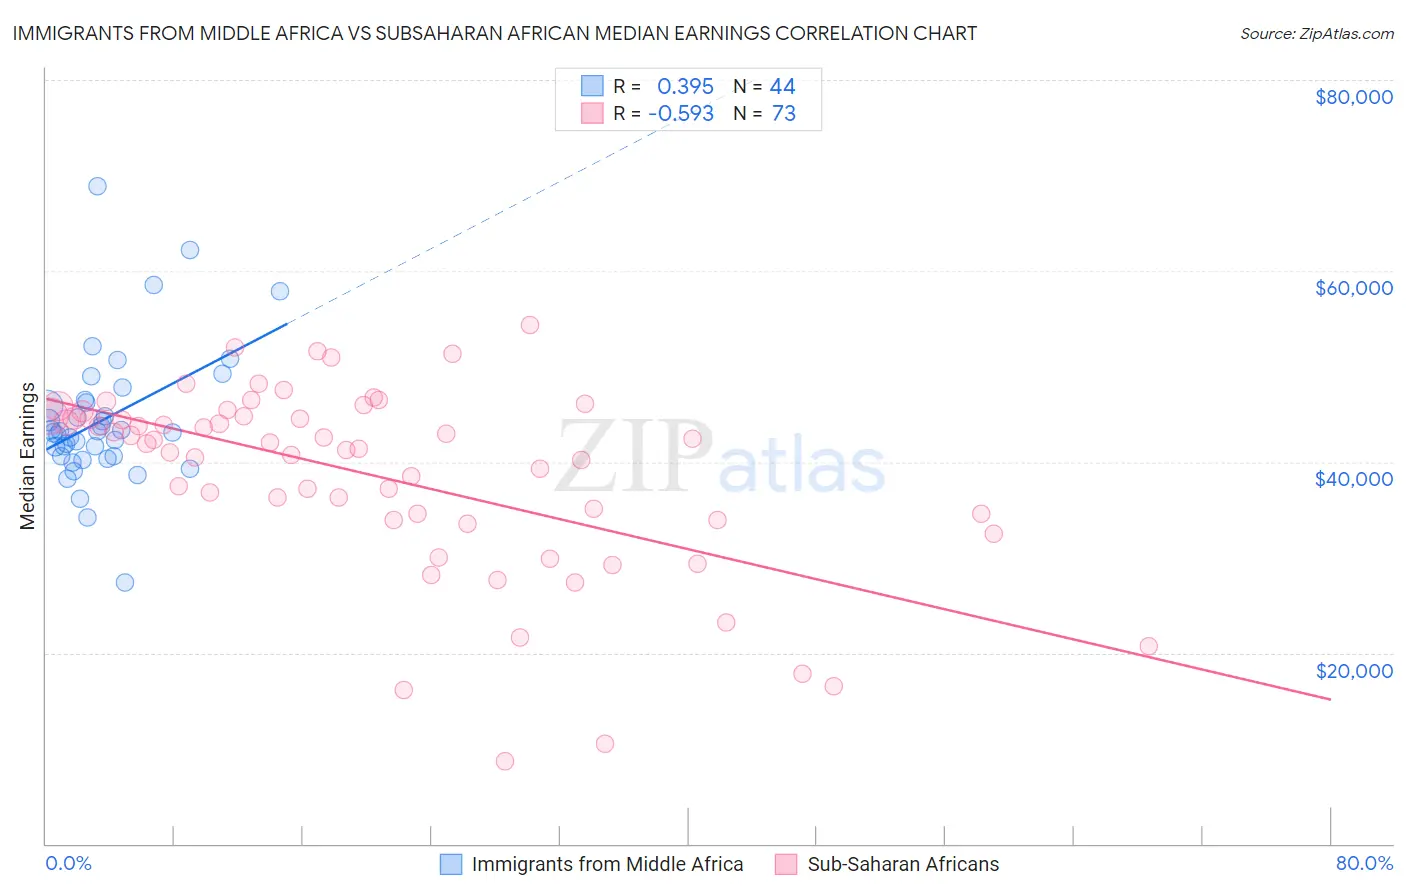 Immigrants from Middle Africa vs Subsaharan African Median Earnings